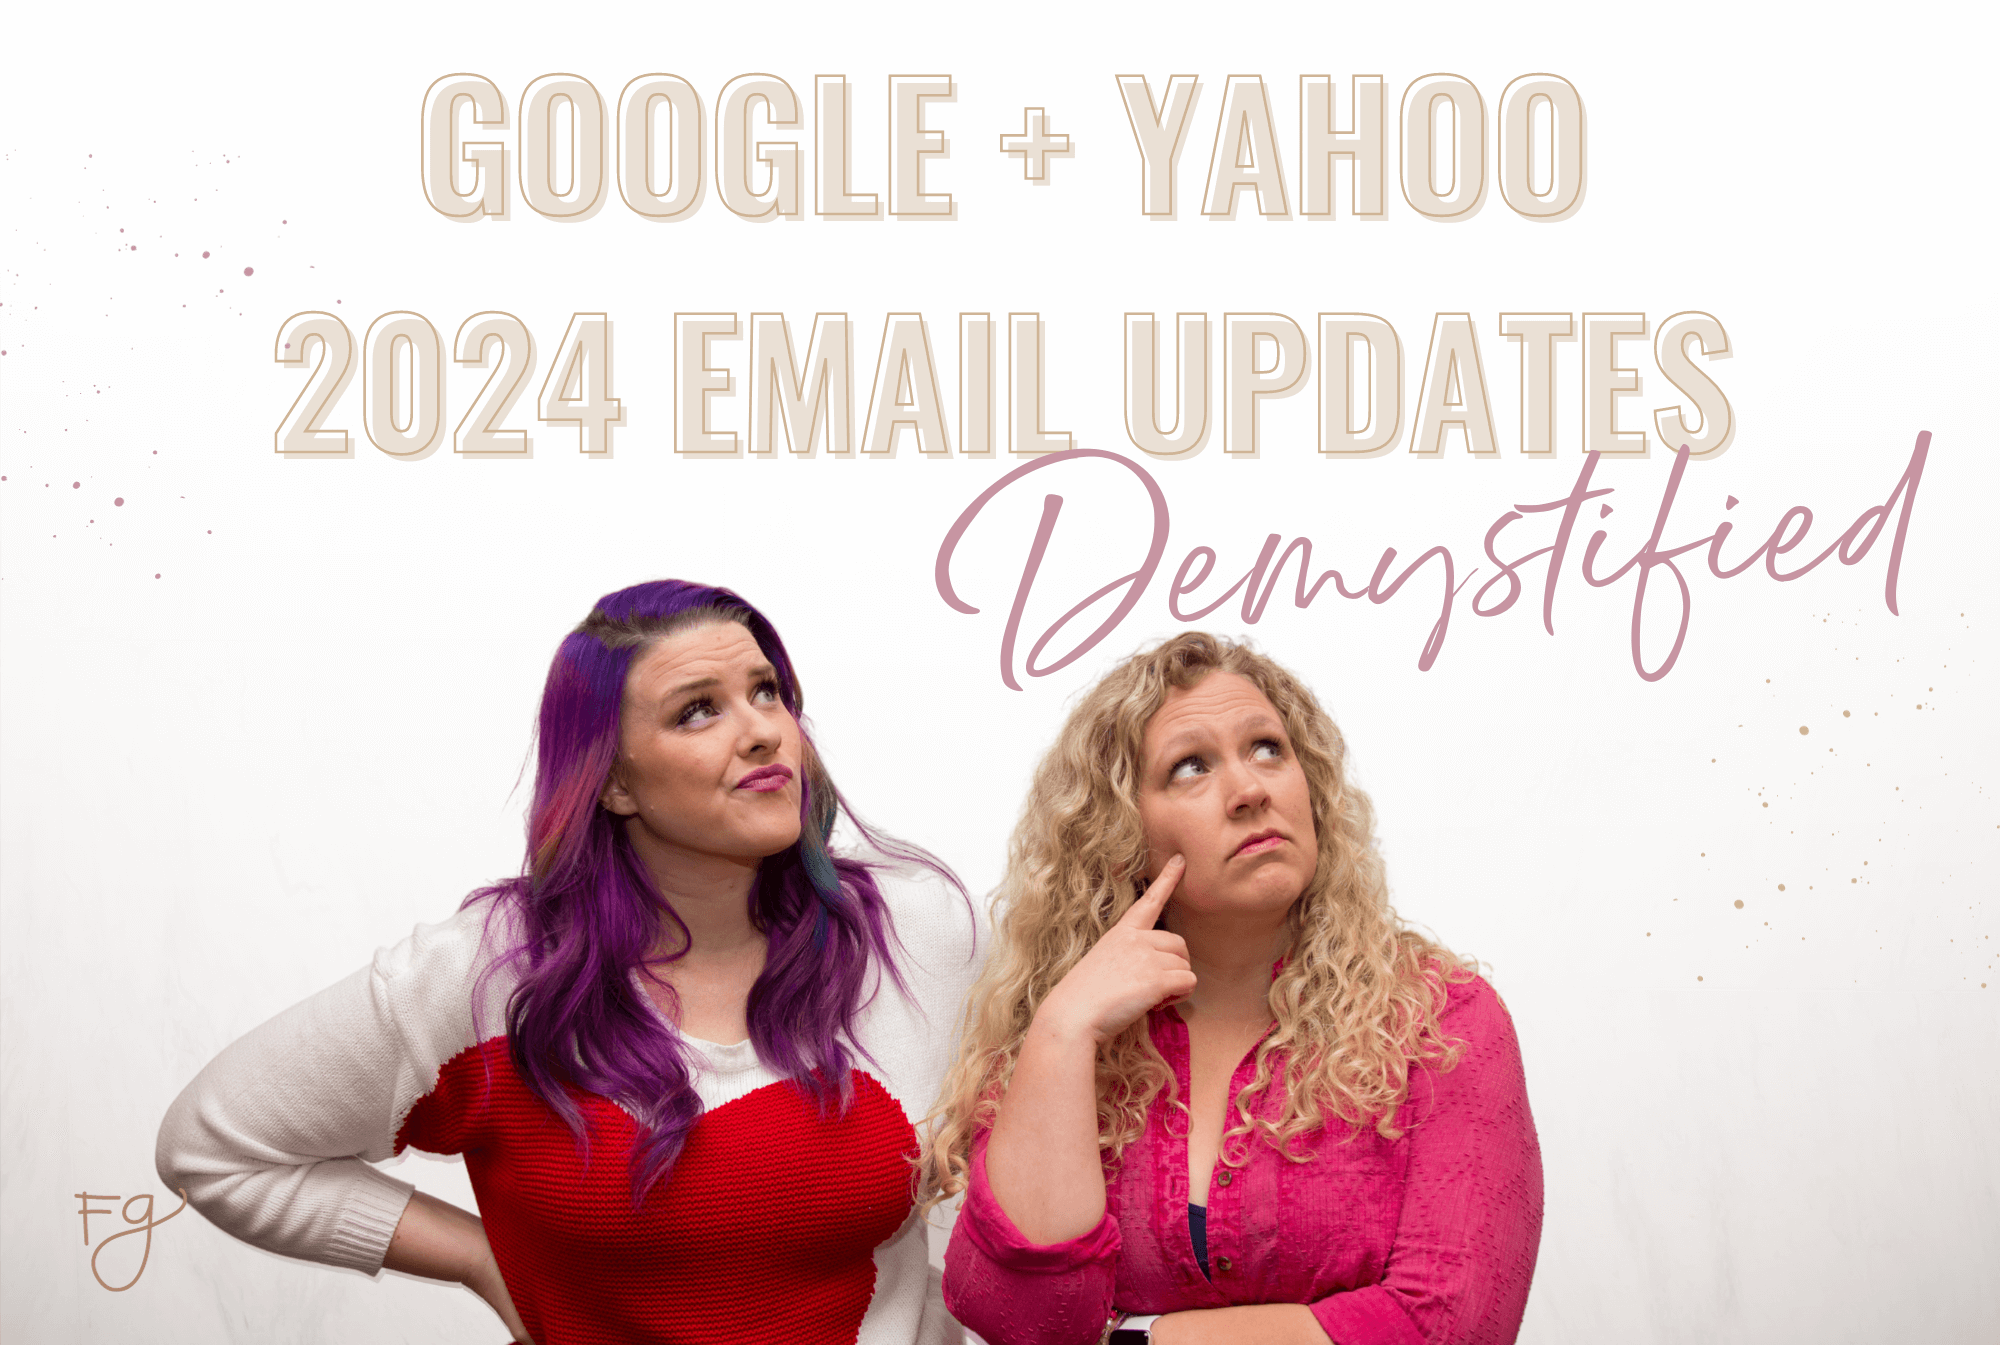 A woman with rainbow colored hair and a women with curly blonde hair are looking up at the title of the blog post with facial expressions conveying they are unsure. The post title reads "Google + Yahoo 2024 Email Updates Demystified"